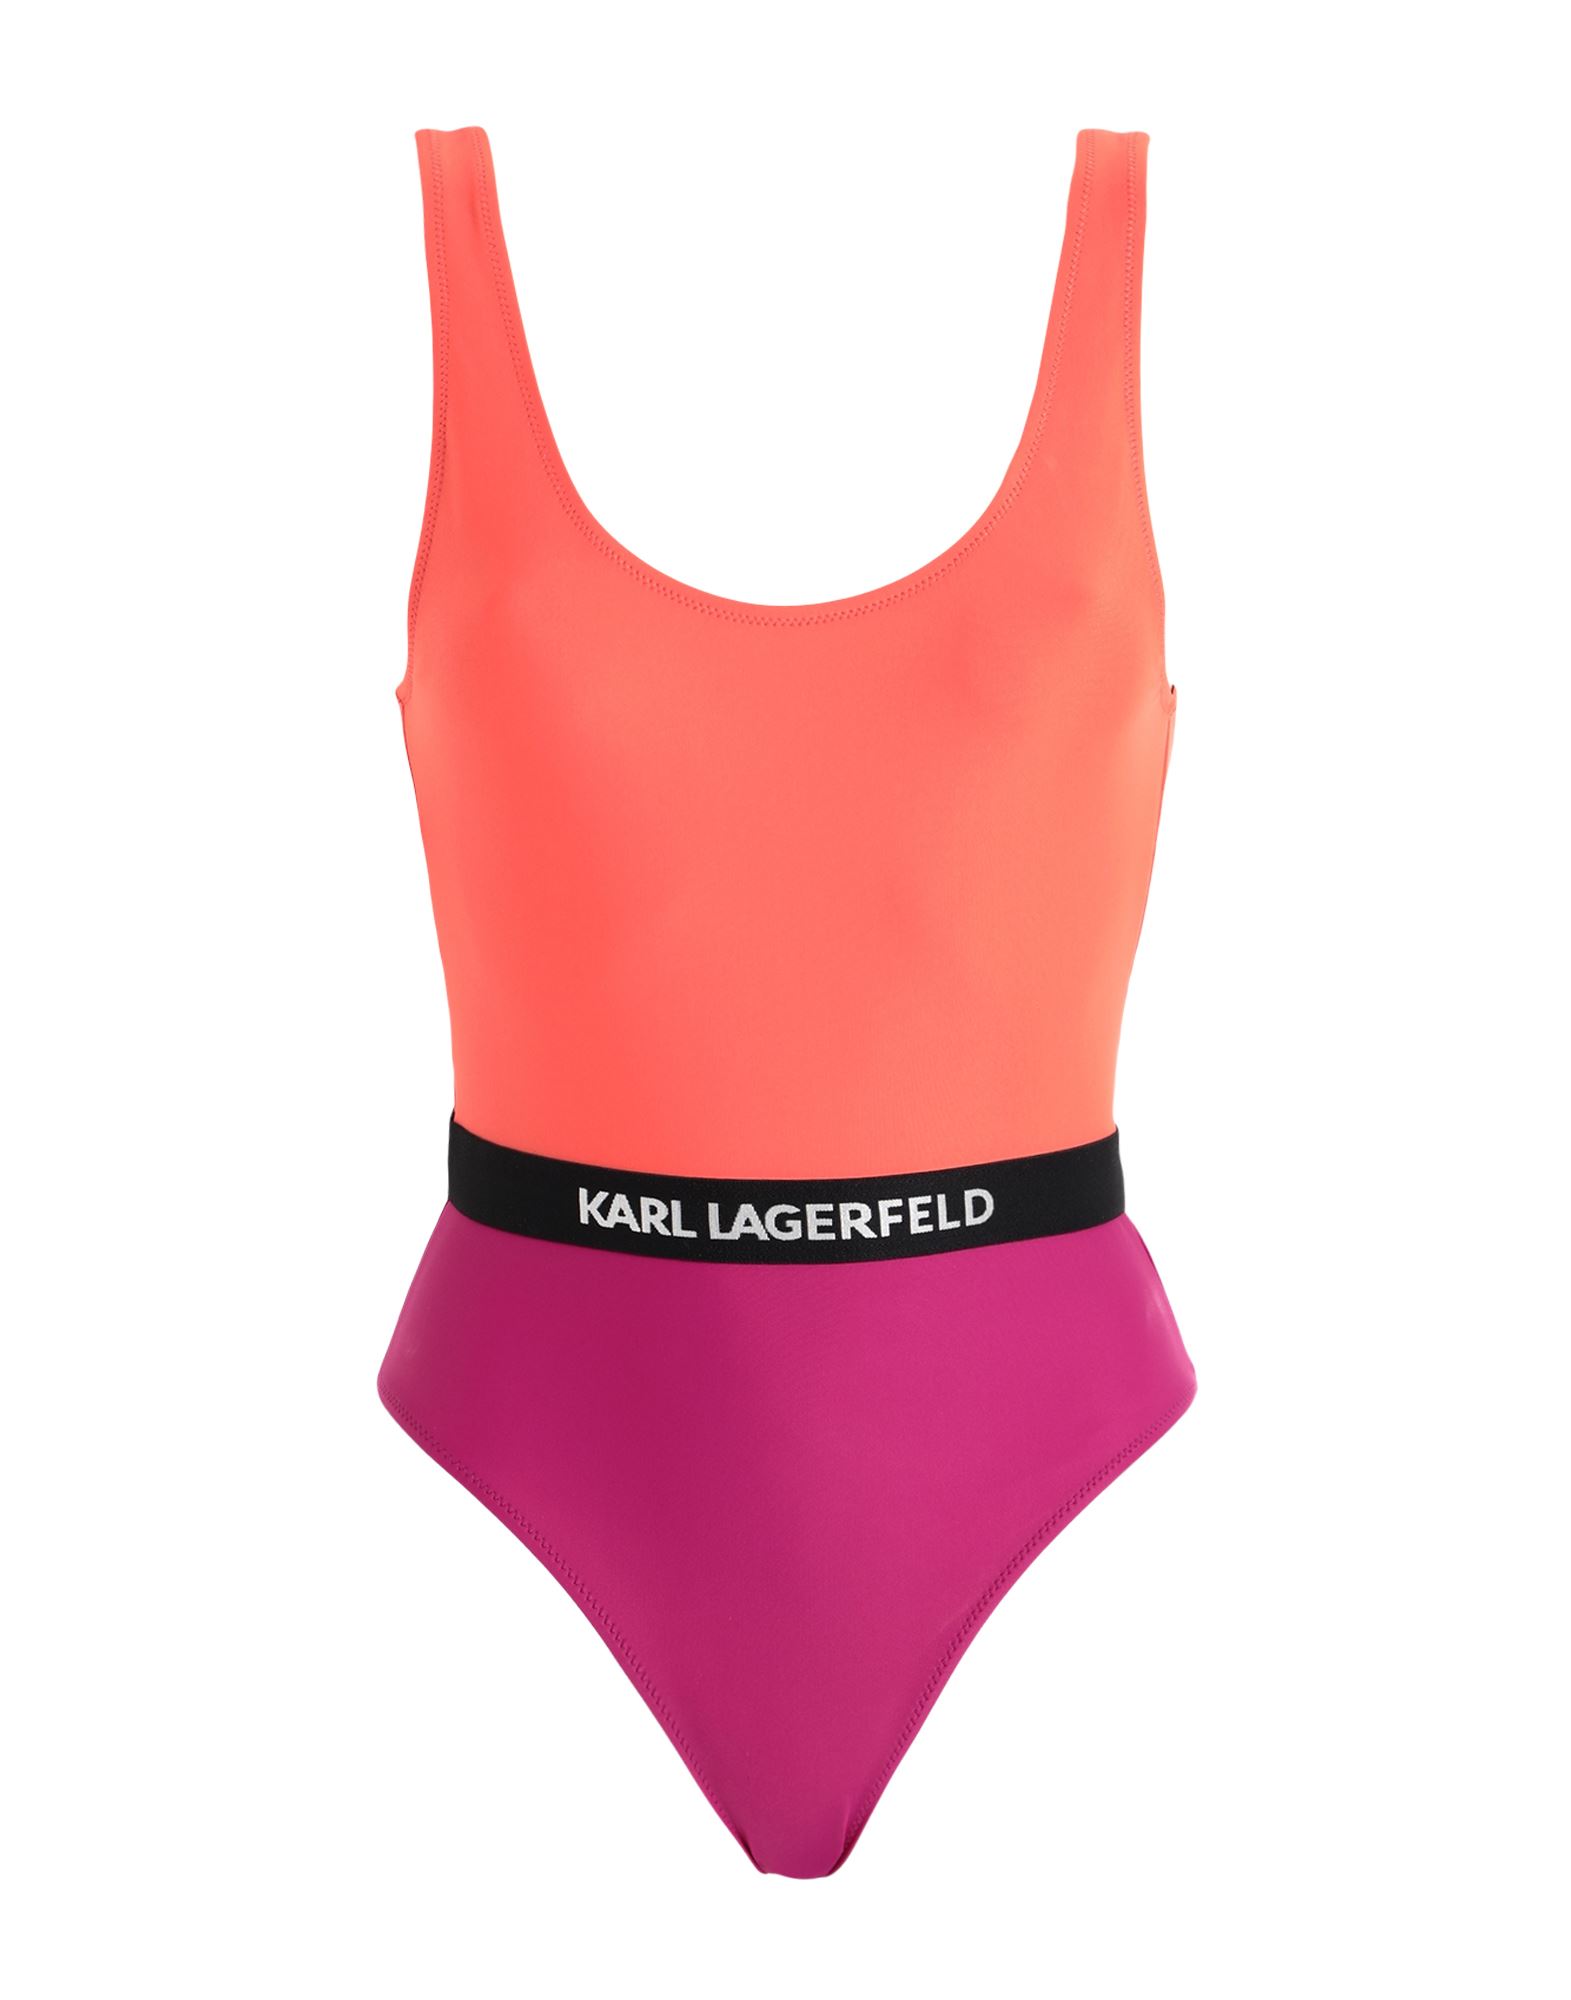 Karl Lagerfeld Colour Block Swimsuit Woman One-piece Swimsuit Orange Size L Recycled Polyamide, Elas